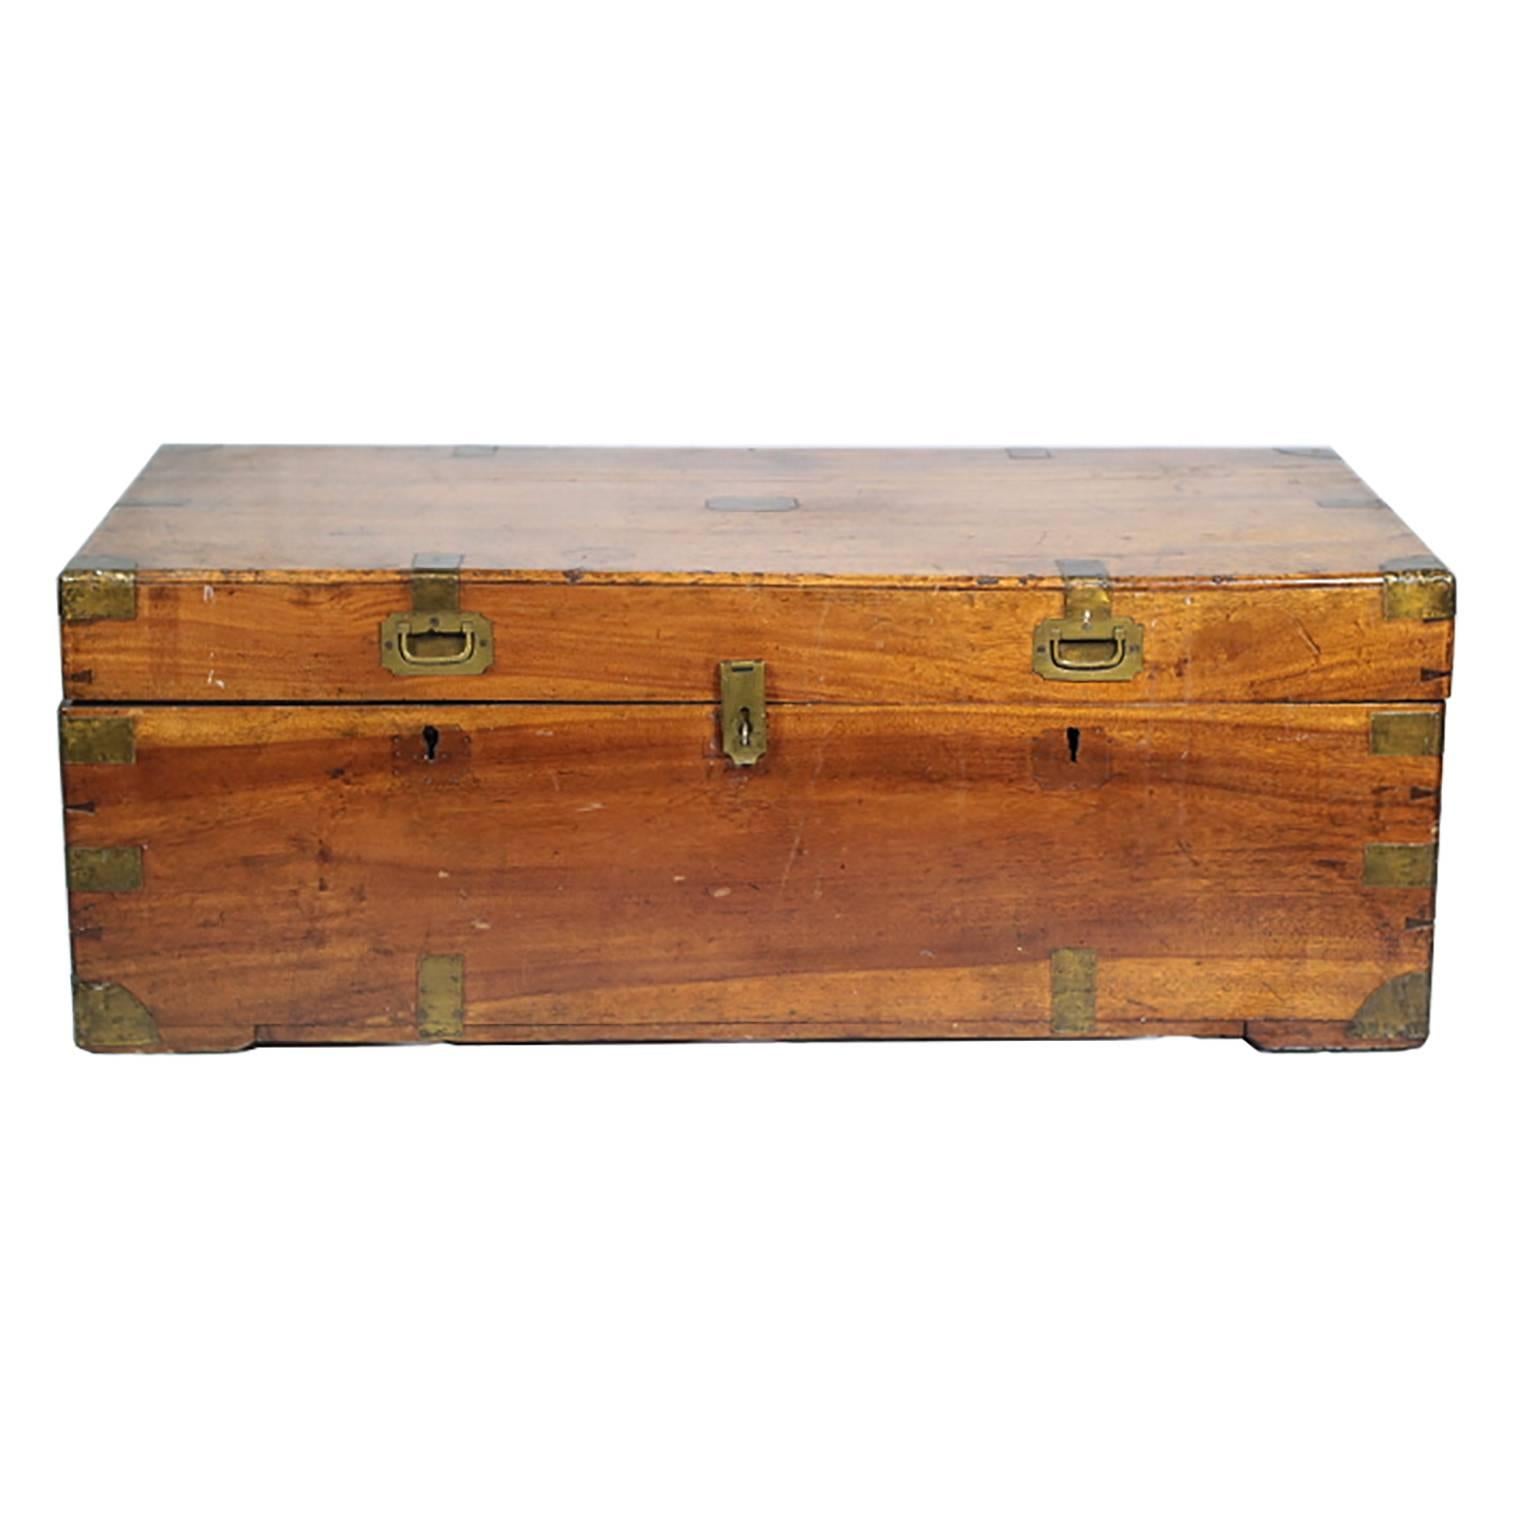 Pre-1820 walnut trunk with two brass handles in front and metal handles on the side. Corner and edge brass detailing throughout the trunk. Interior has been relined with cedar. 